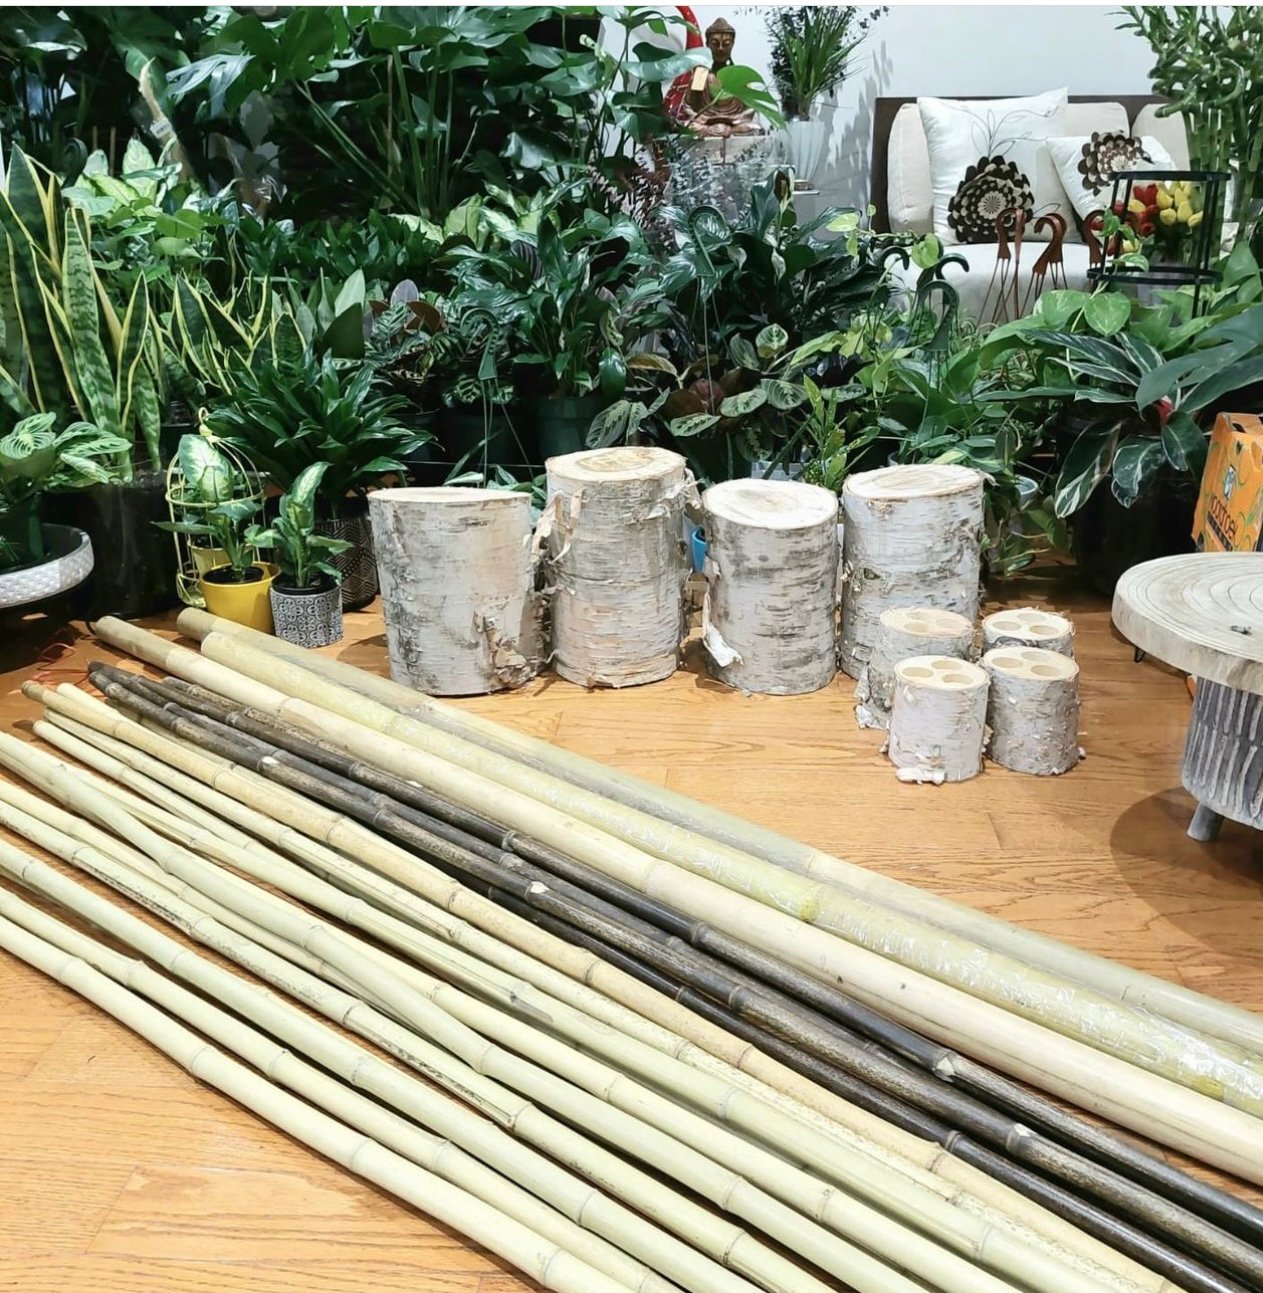 Discover key tips on 'How To Choose A Bamboo Supplier' for quality, sustainability, and value in our comprehensive guide.